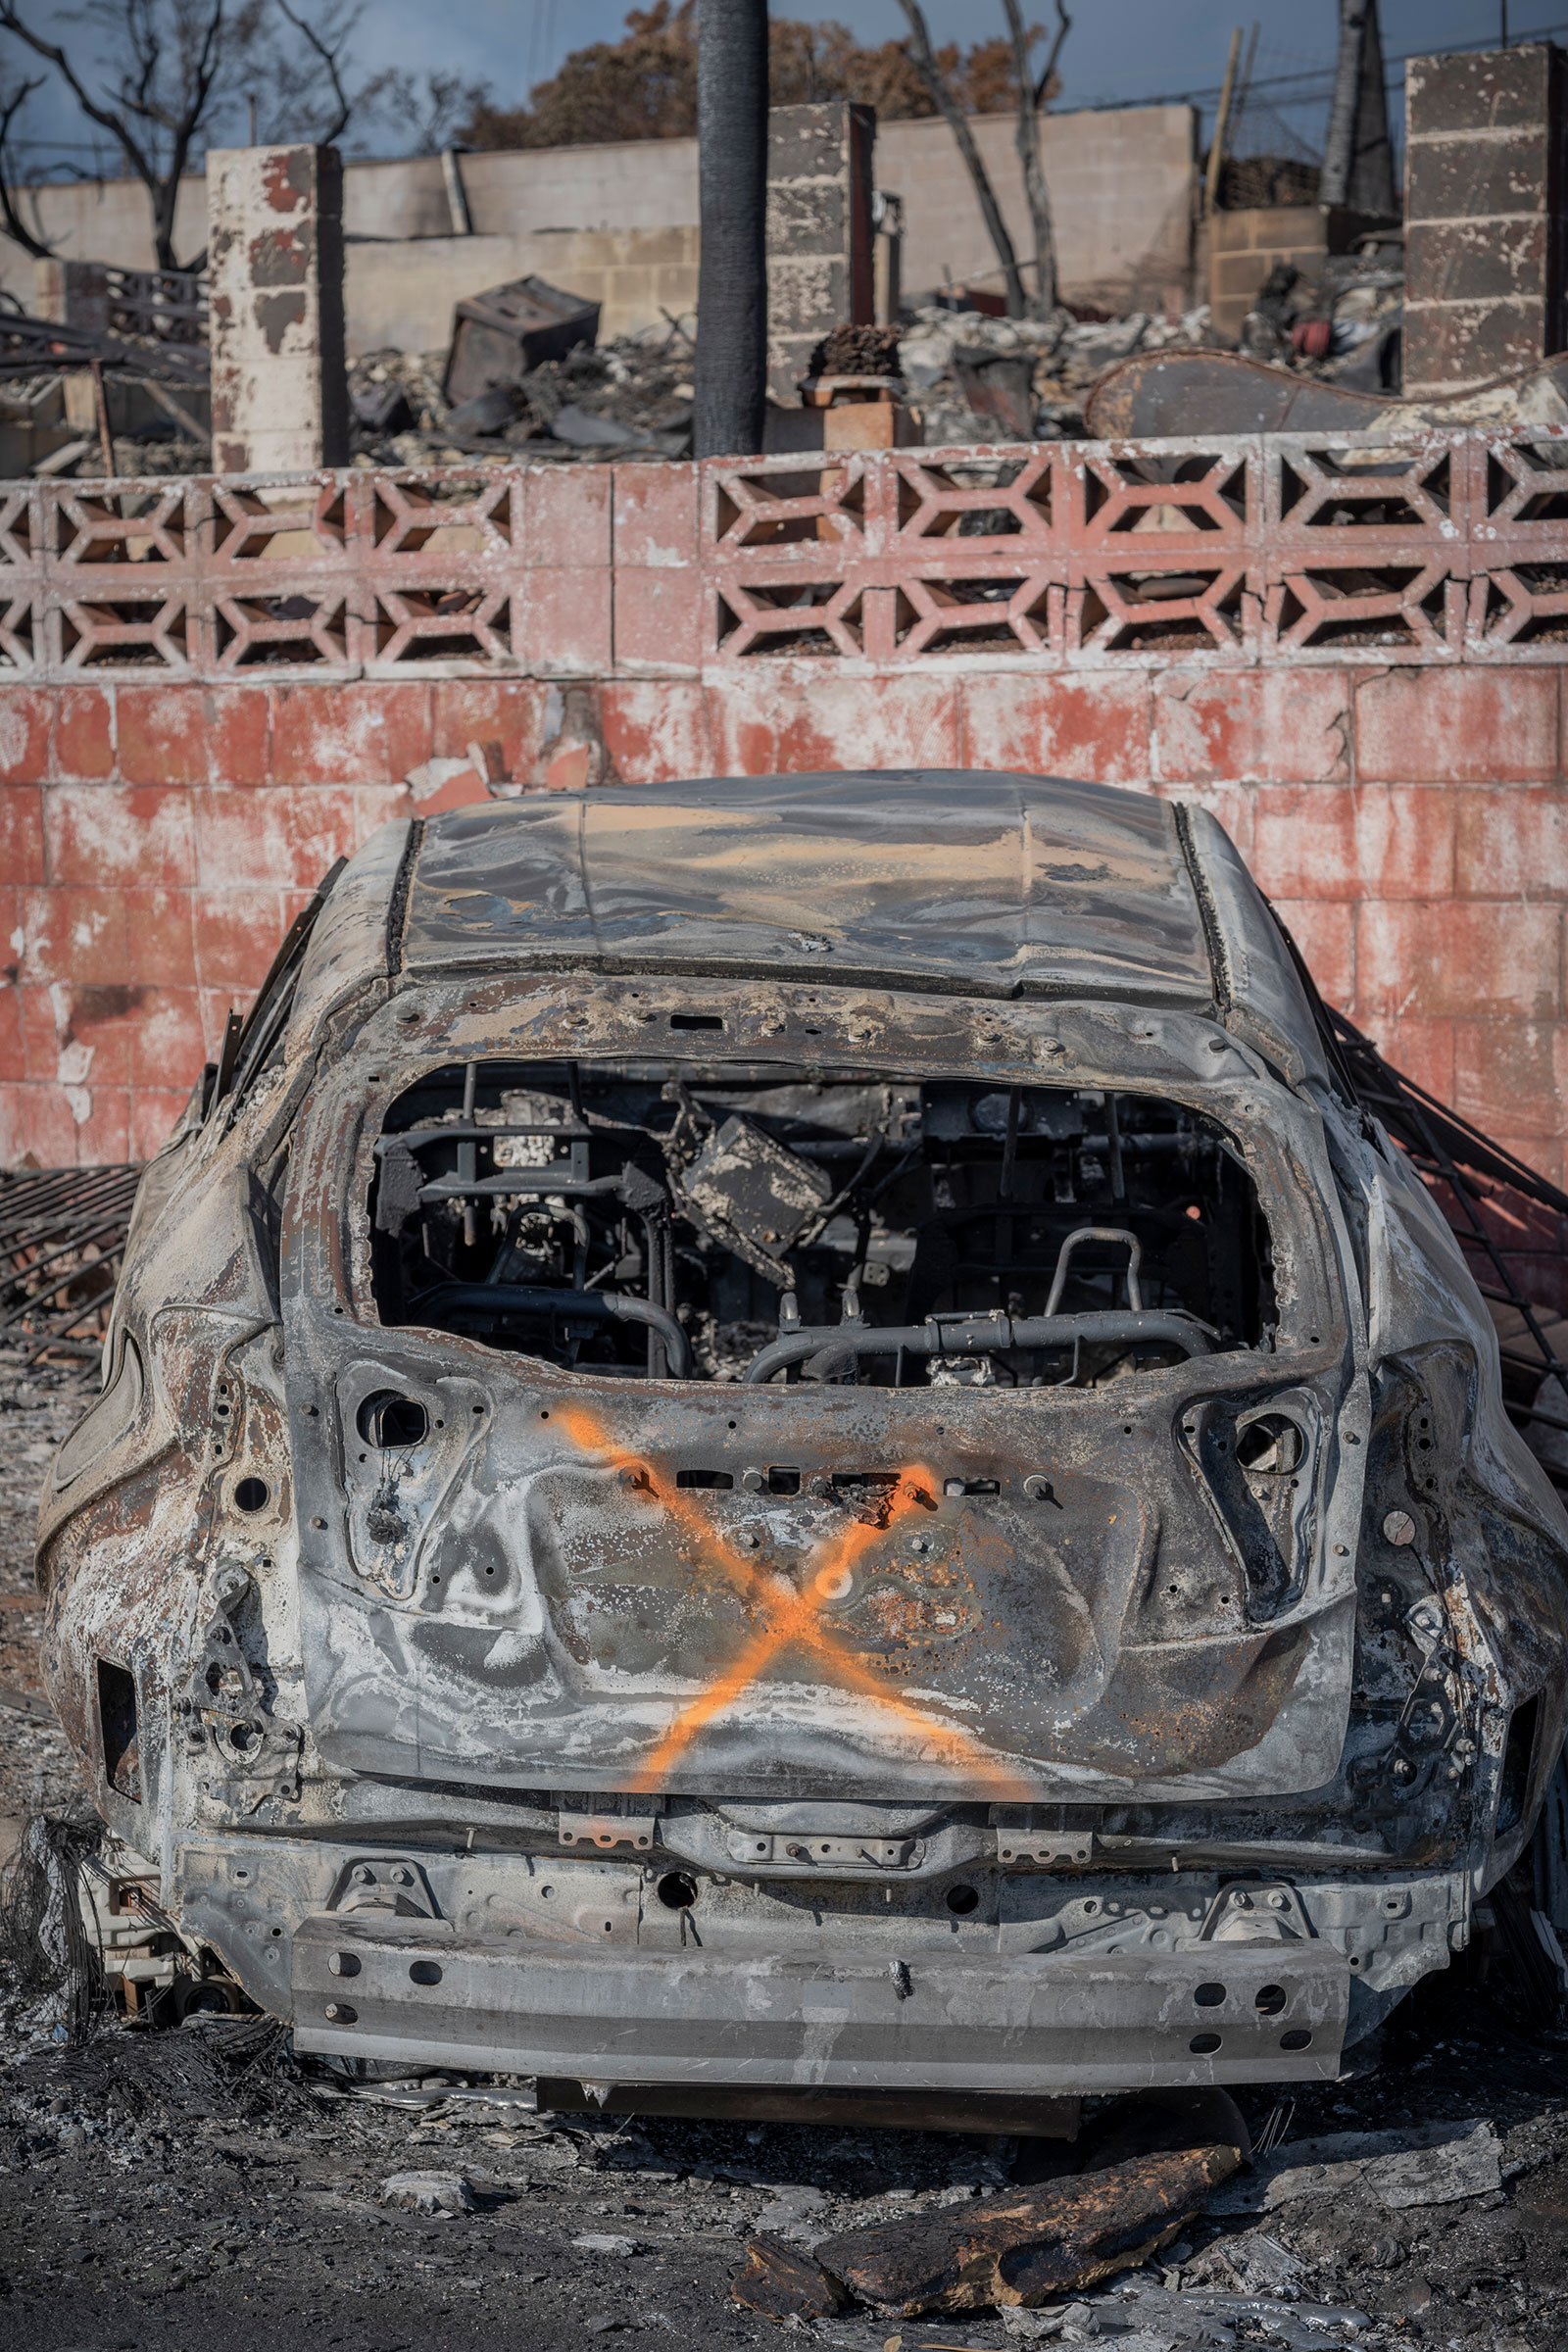 August 14, 2023  Lahaina, Hawaii  Scenes of devastation where deadly fires swept through this popular island town on August 8, 2023. Some of the burned vehicles show an “X” which was painted by search and rescue crews signifying the vehicle has been checked and does not contain human remains. Photo by David Butow for TIME.